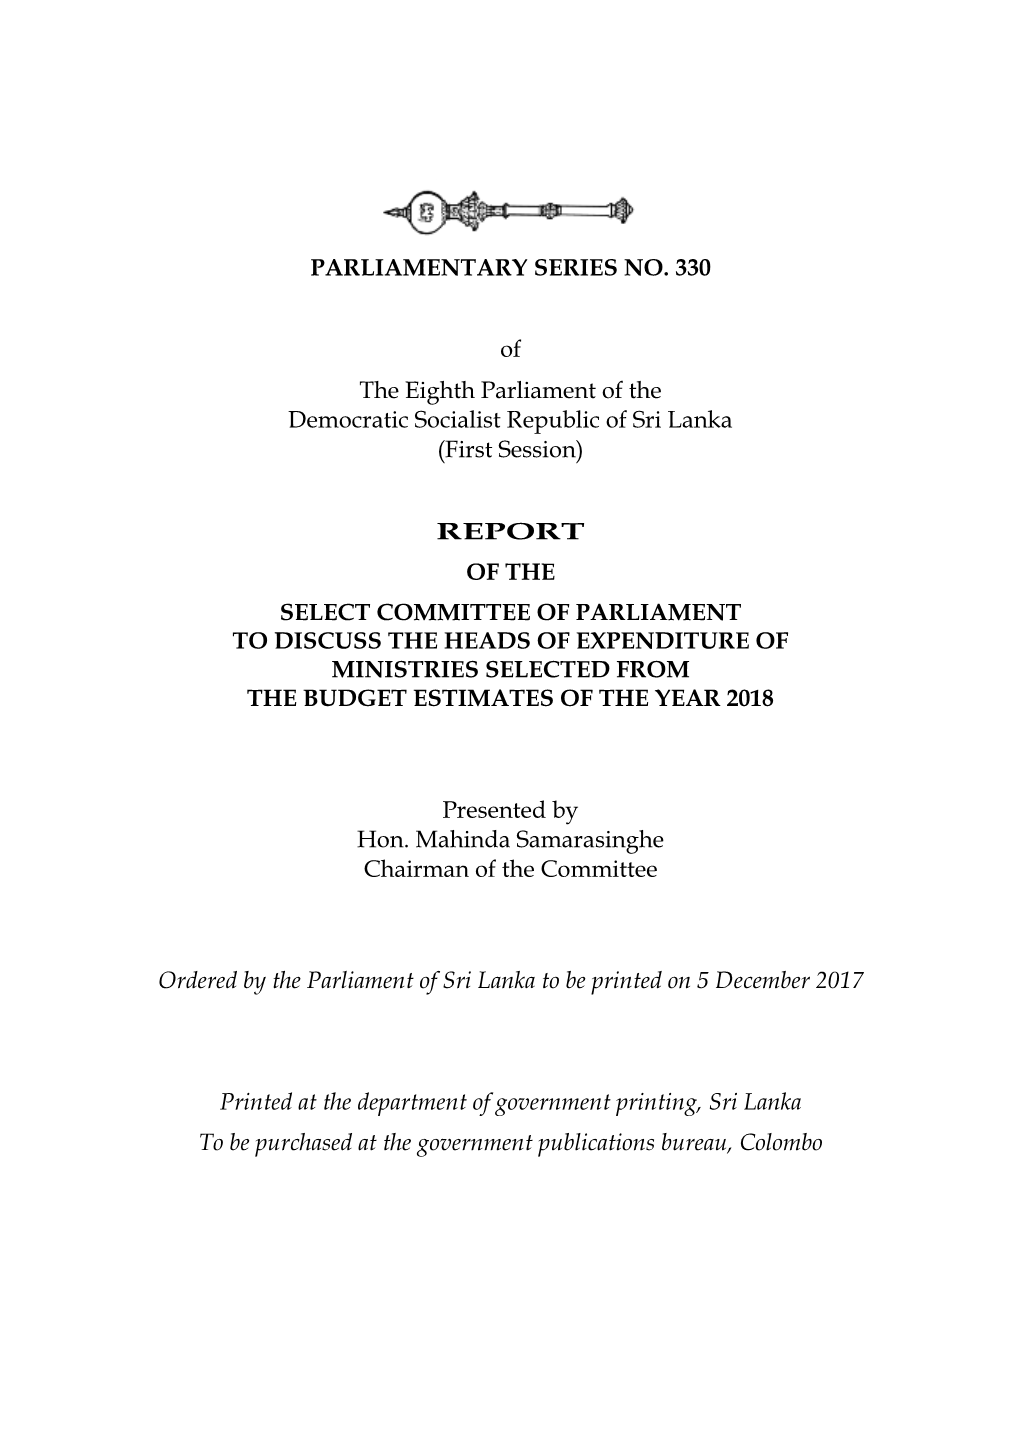 Report of the Select Committee of Parliament to Discuss the Heads of Expenditure of Ministries Selected from the Budget Estimates of the Year 2018